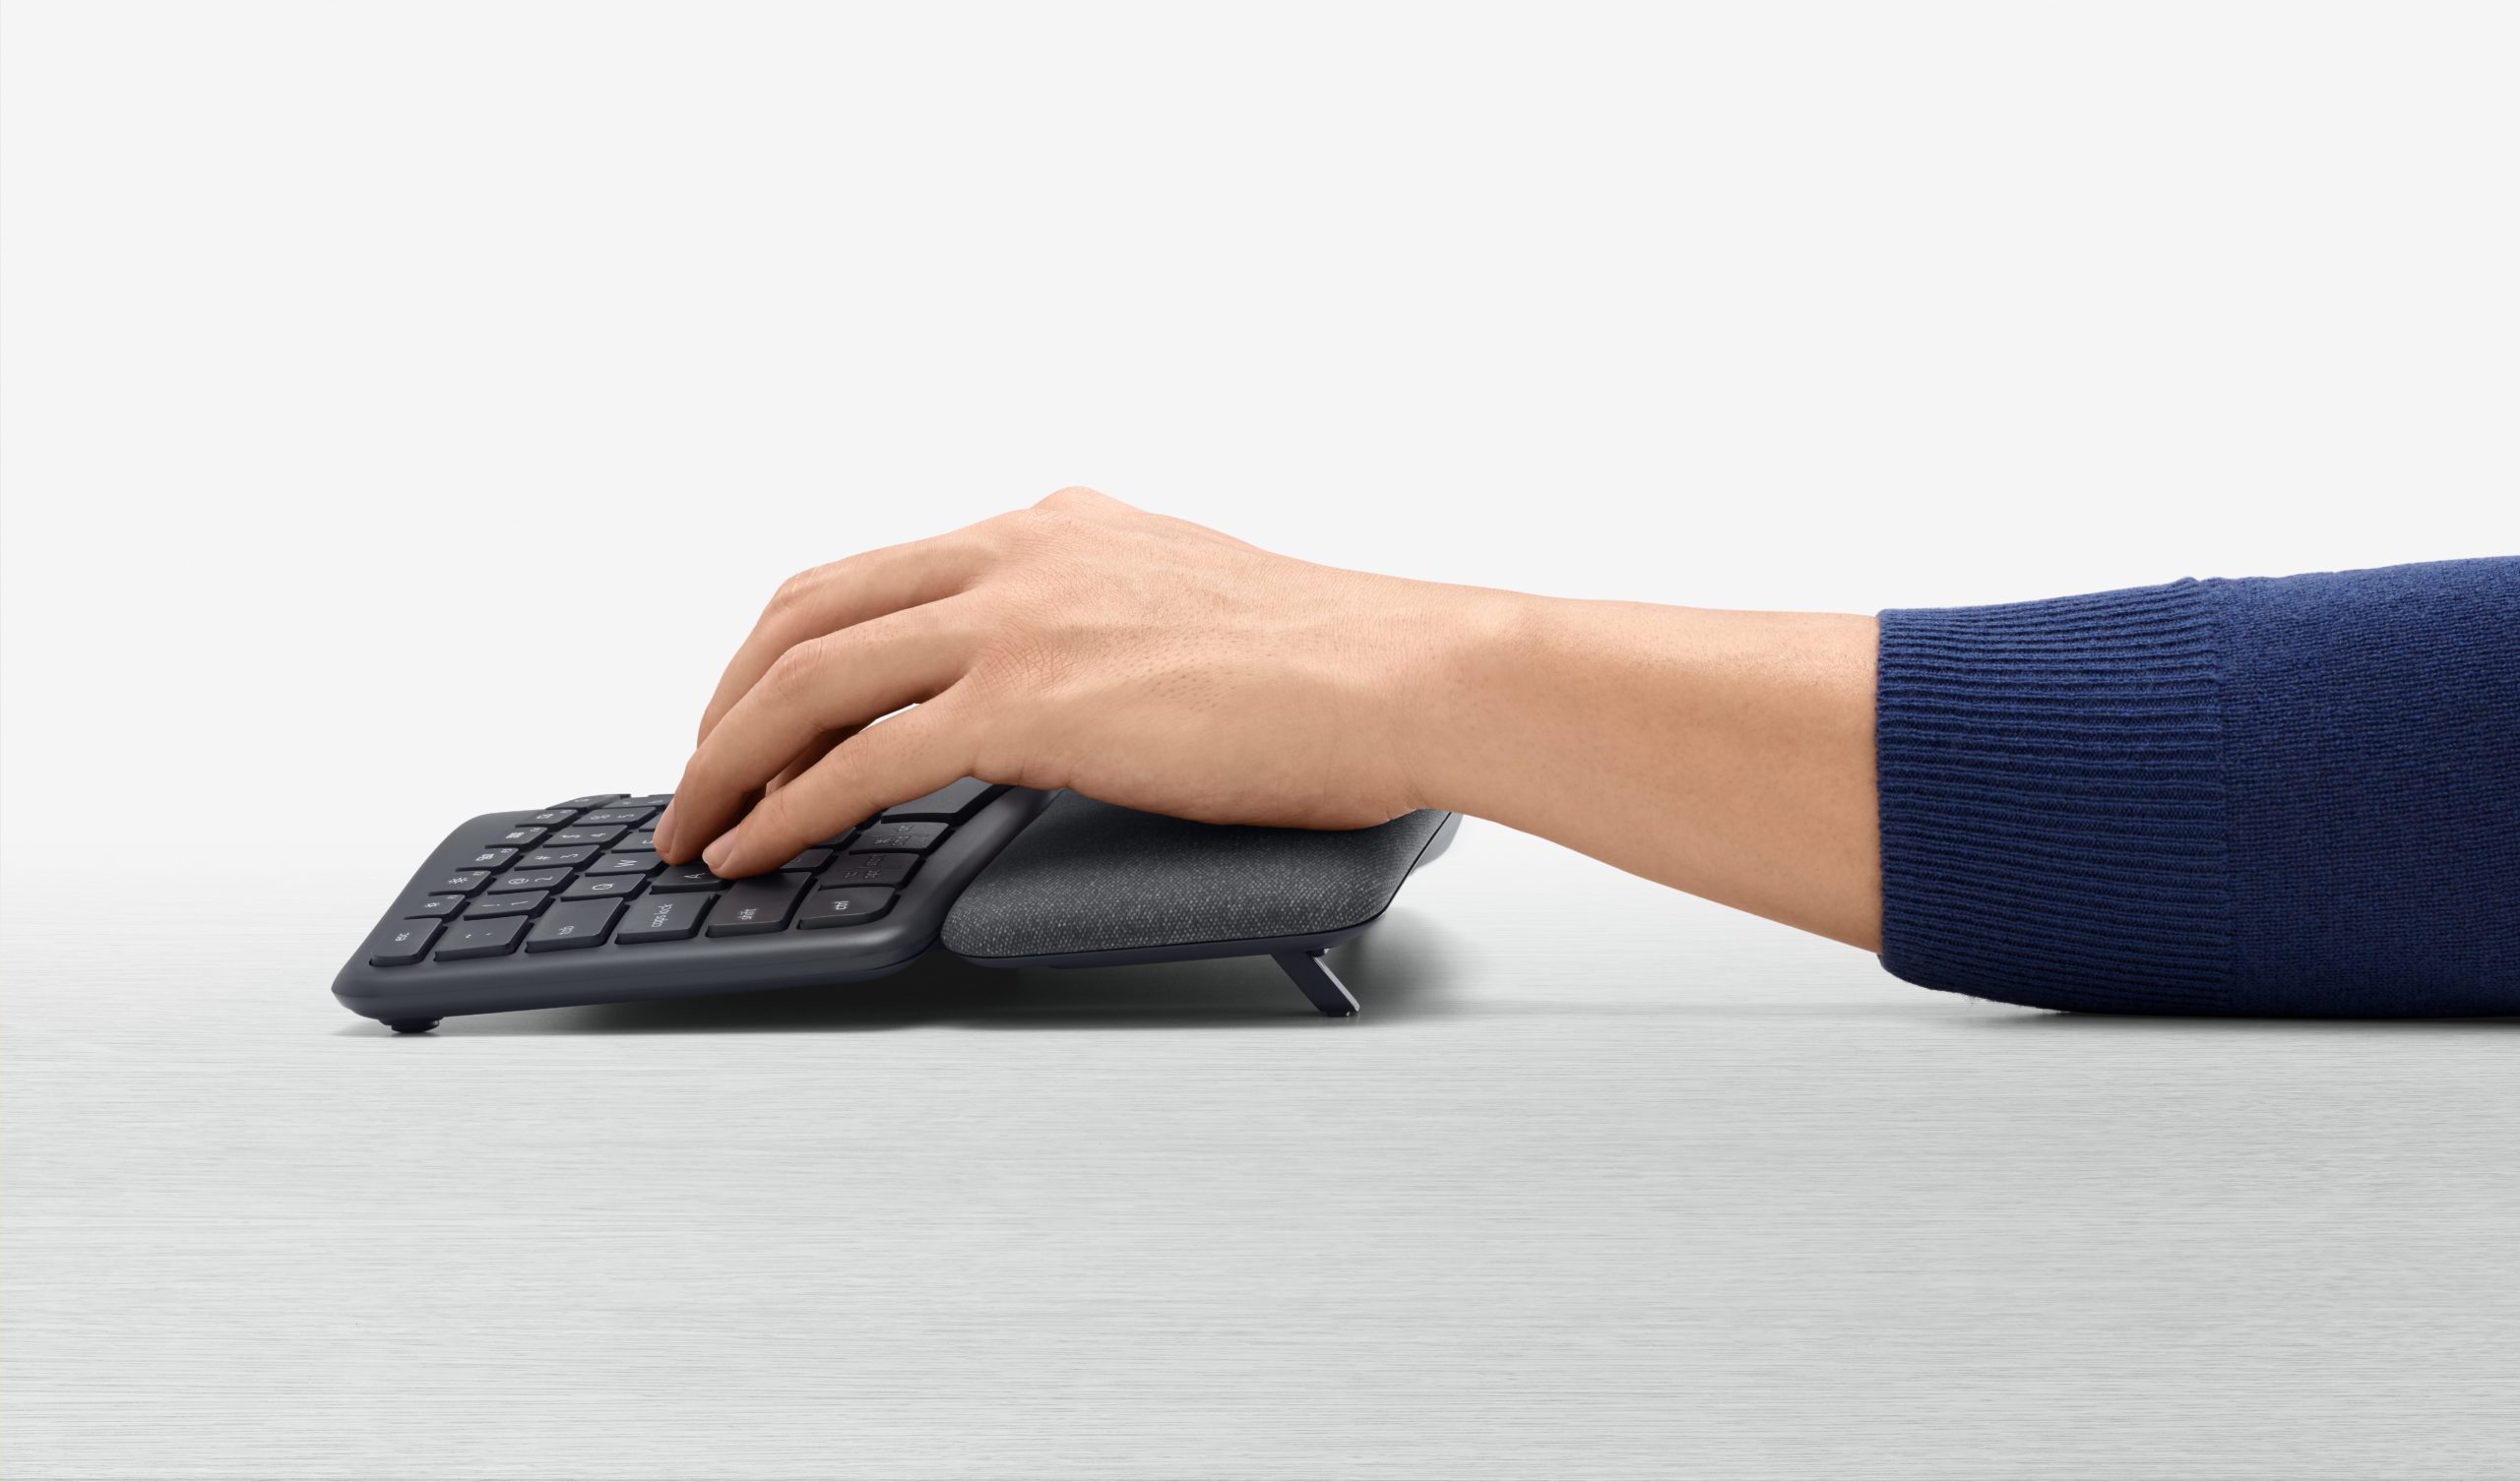 With the Logitech Ergo K860 ergonomic keyboard, it's all about comfort (and reduced muscle fatigue).